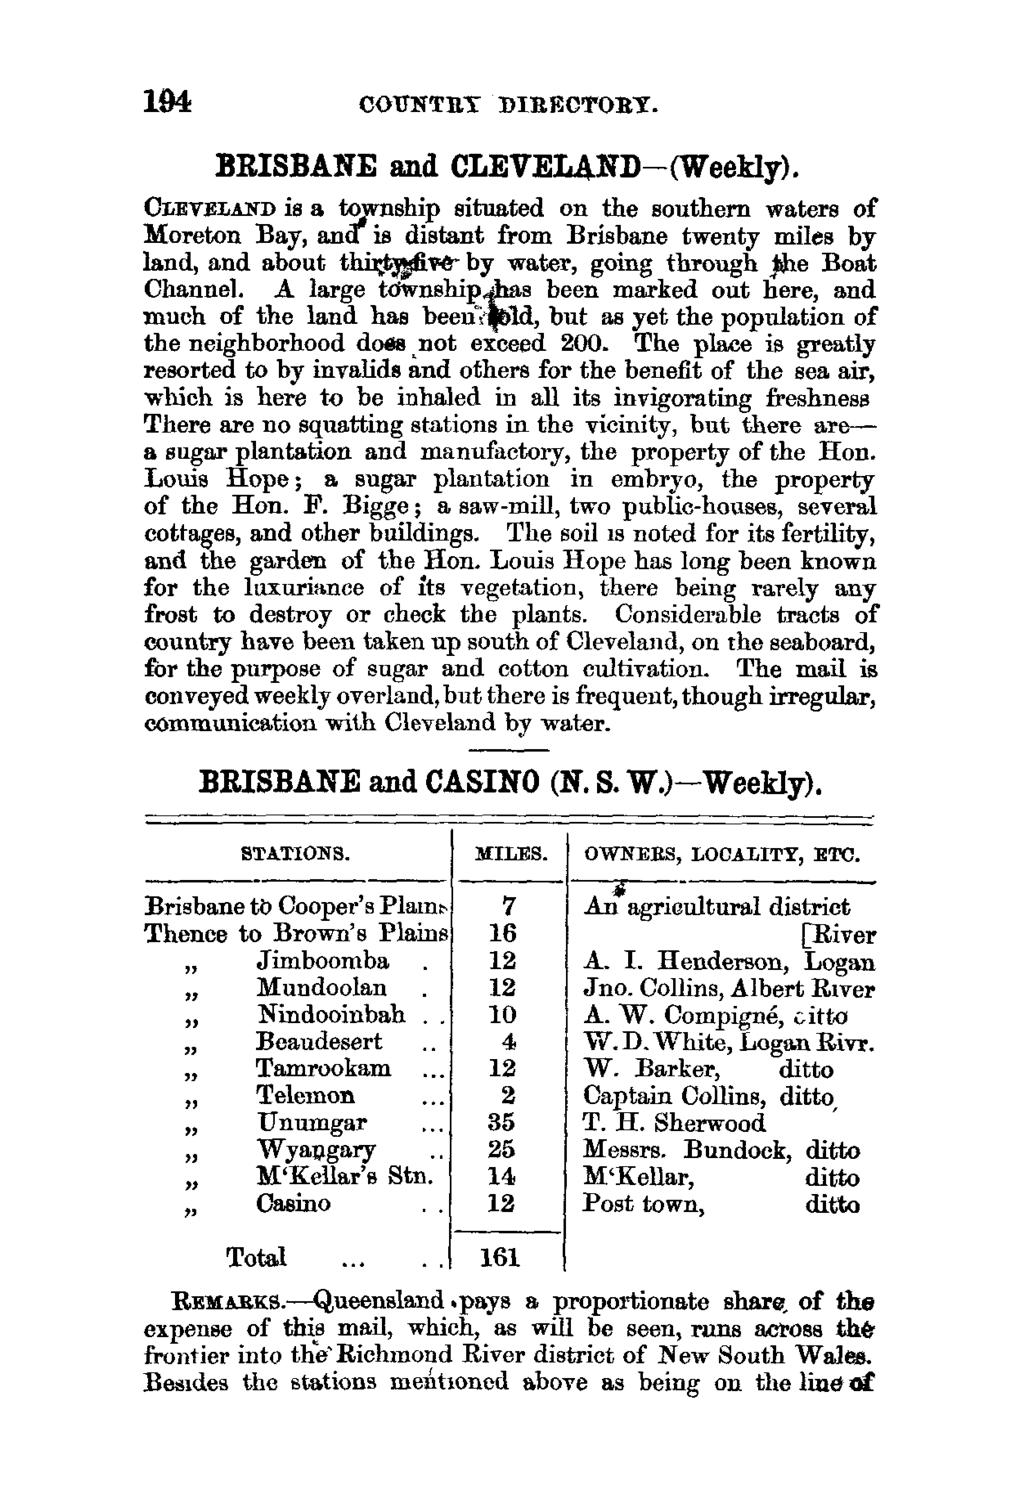 194 COIINTRT DIRECTORY. BRISBANE and CLEVELAND -( Weekly).